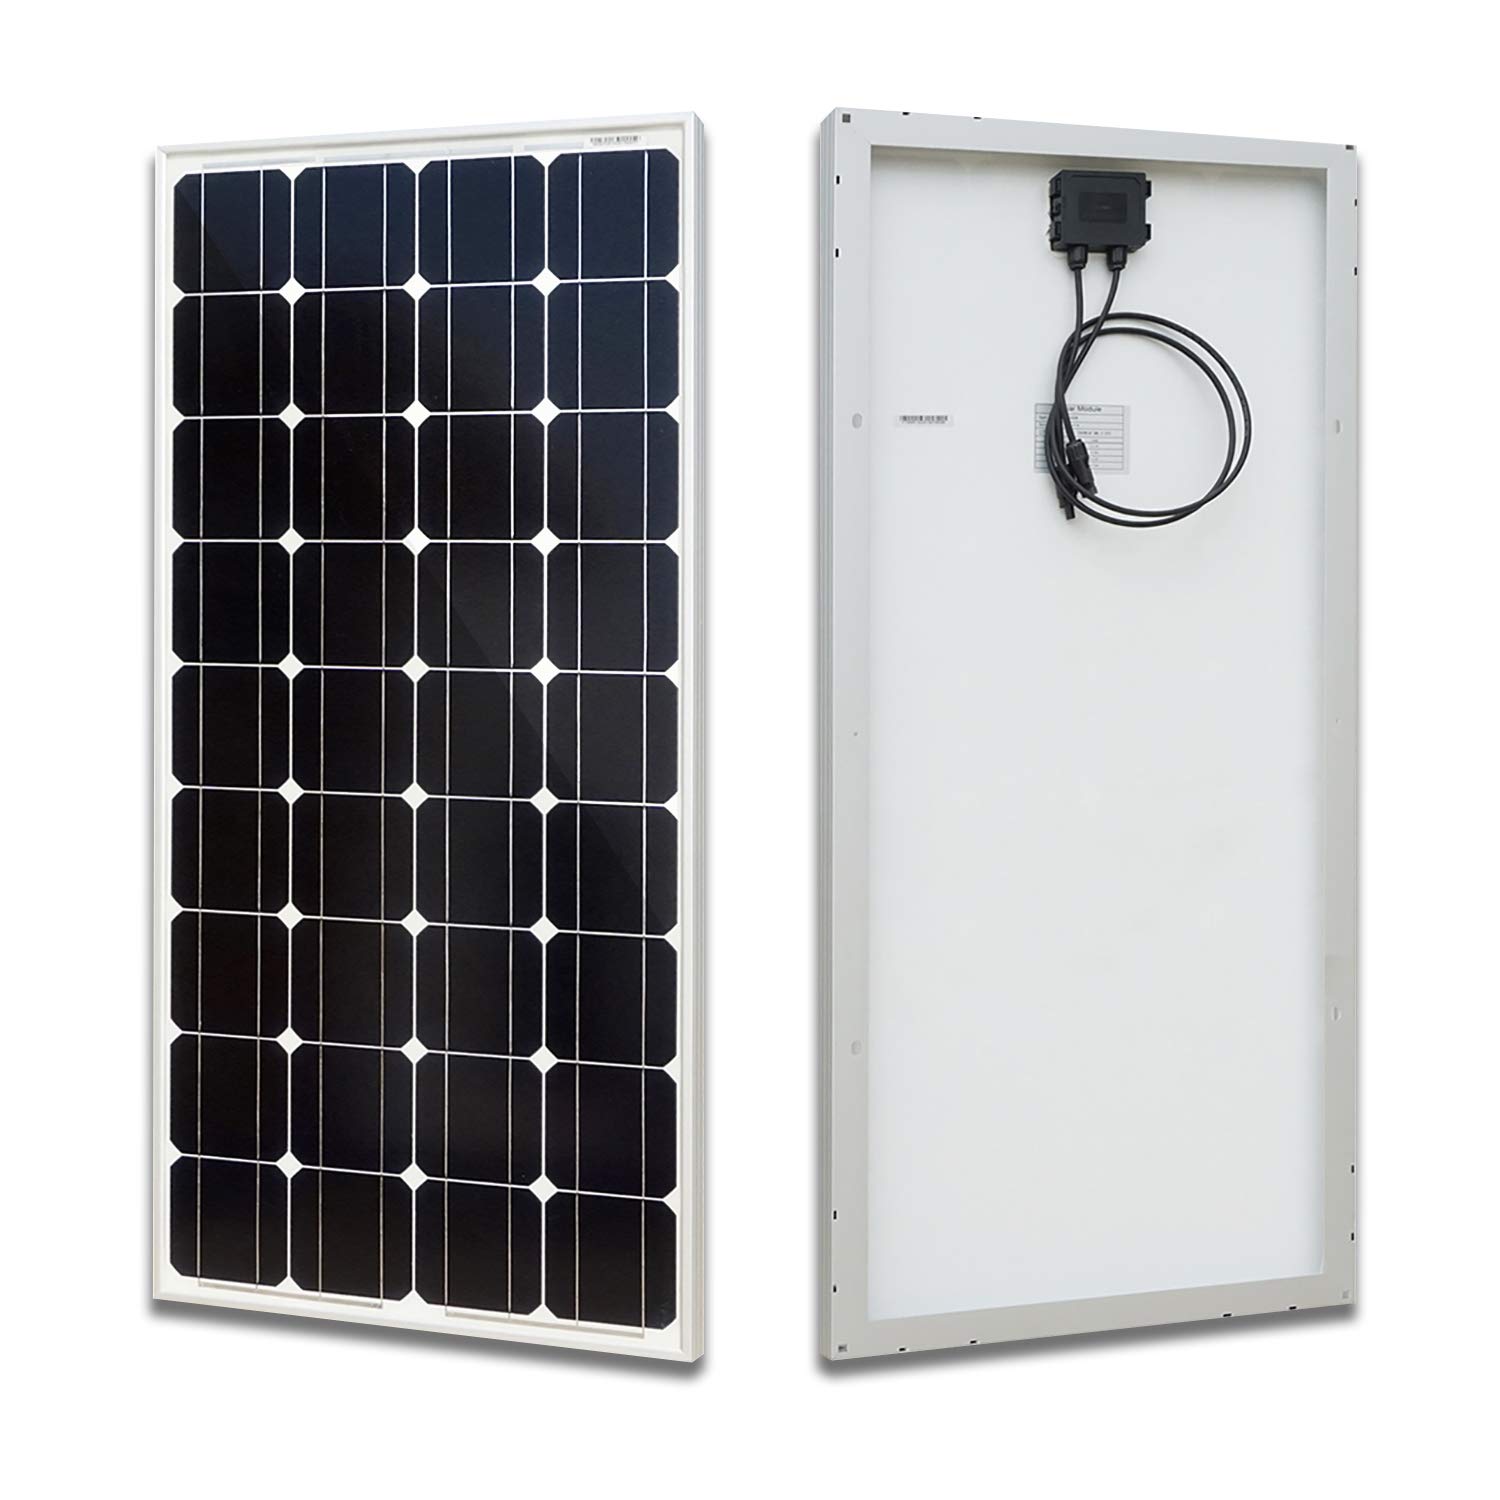 100 Watt Solar Panel 12 Volts Monocrystalline ELECTRICAL AND HOME APPLIANCE CDIVINE ANSWER